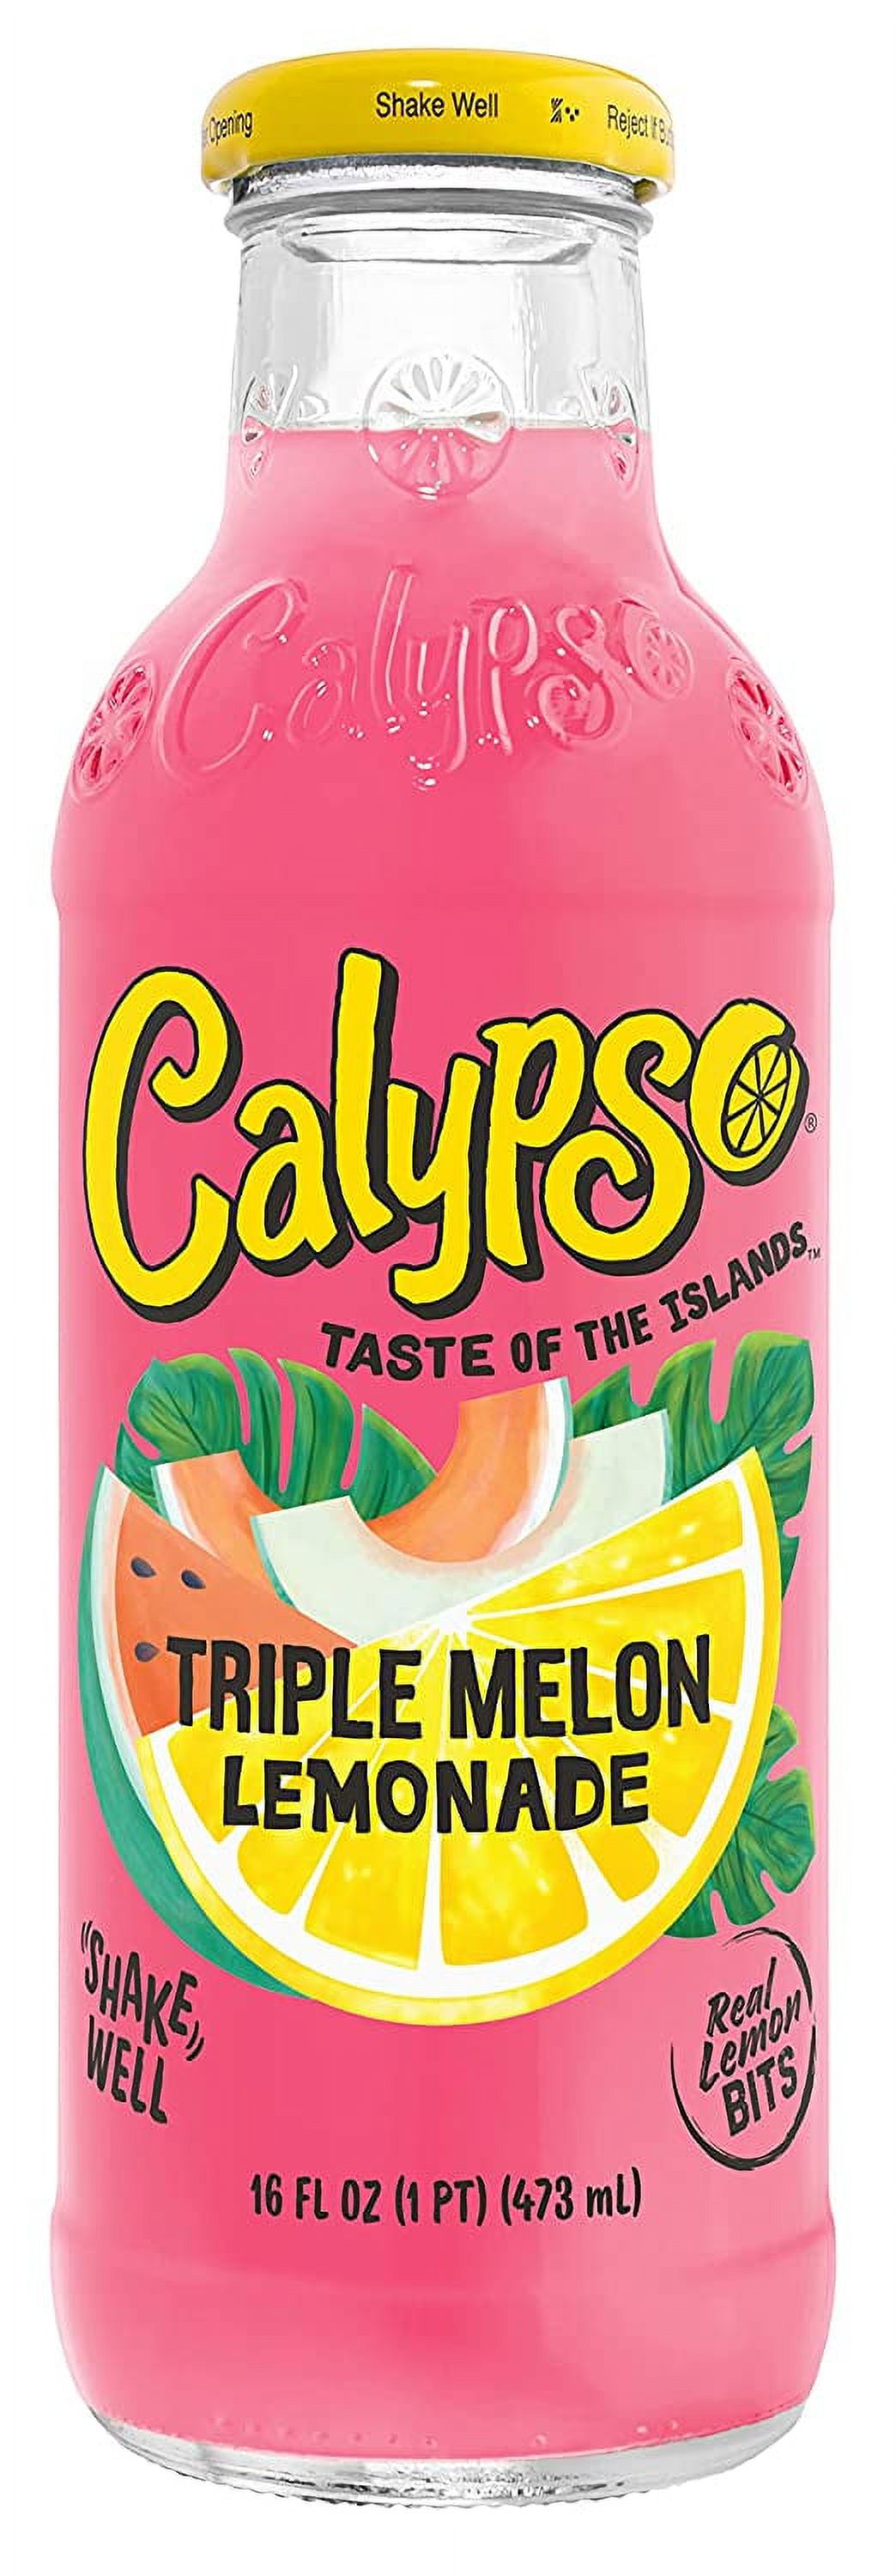 Calypso Lemonade | Made with Real Fruit and Natural Flavors | 6 Flavor Variety, 16 Fl Oz (Pack of 24) - image 3 of 7